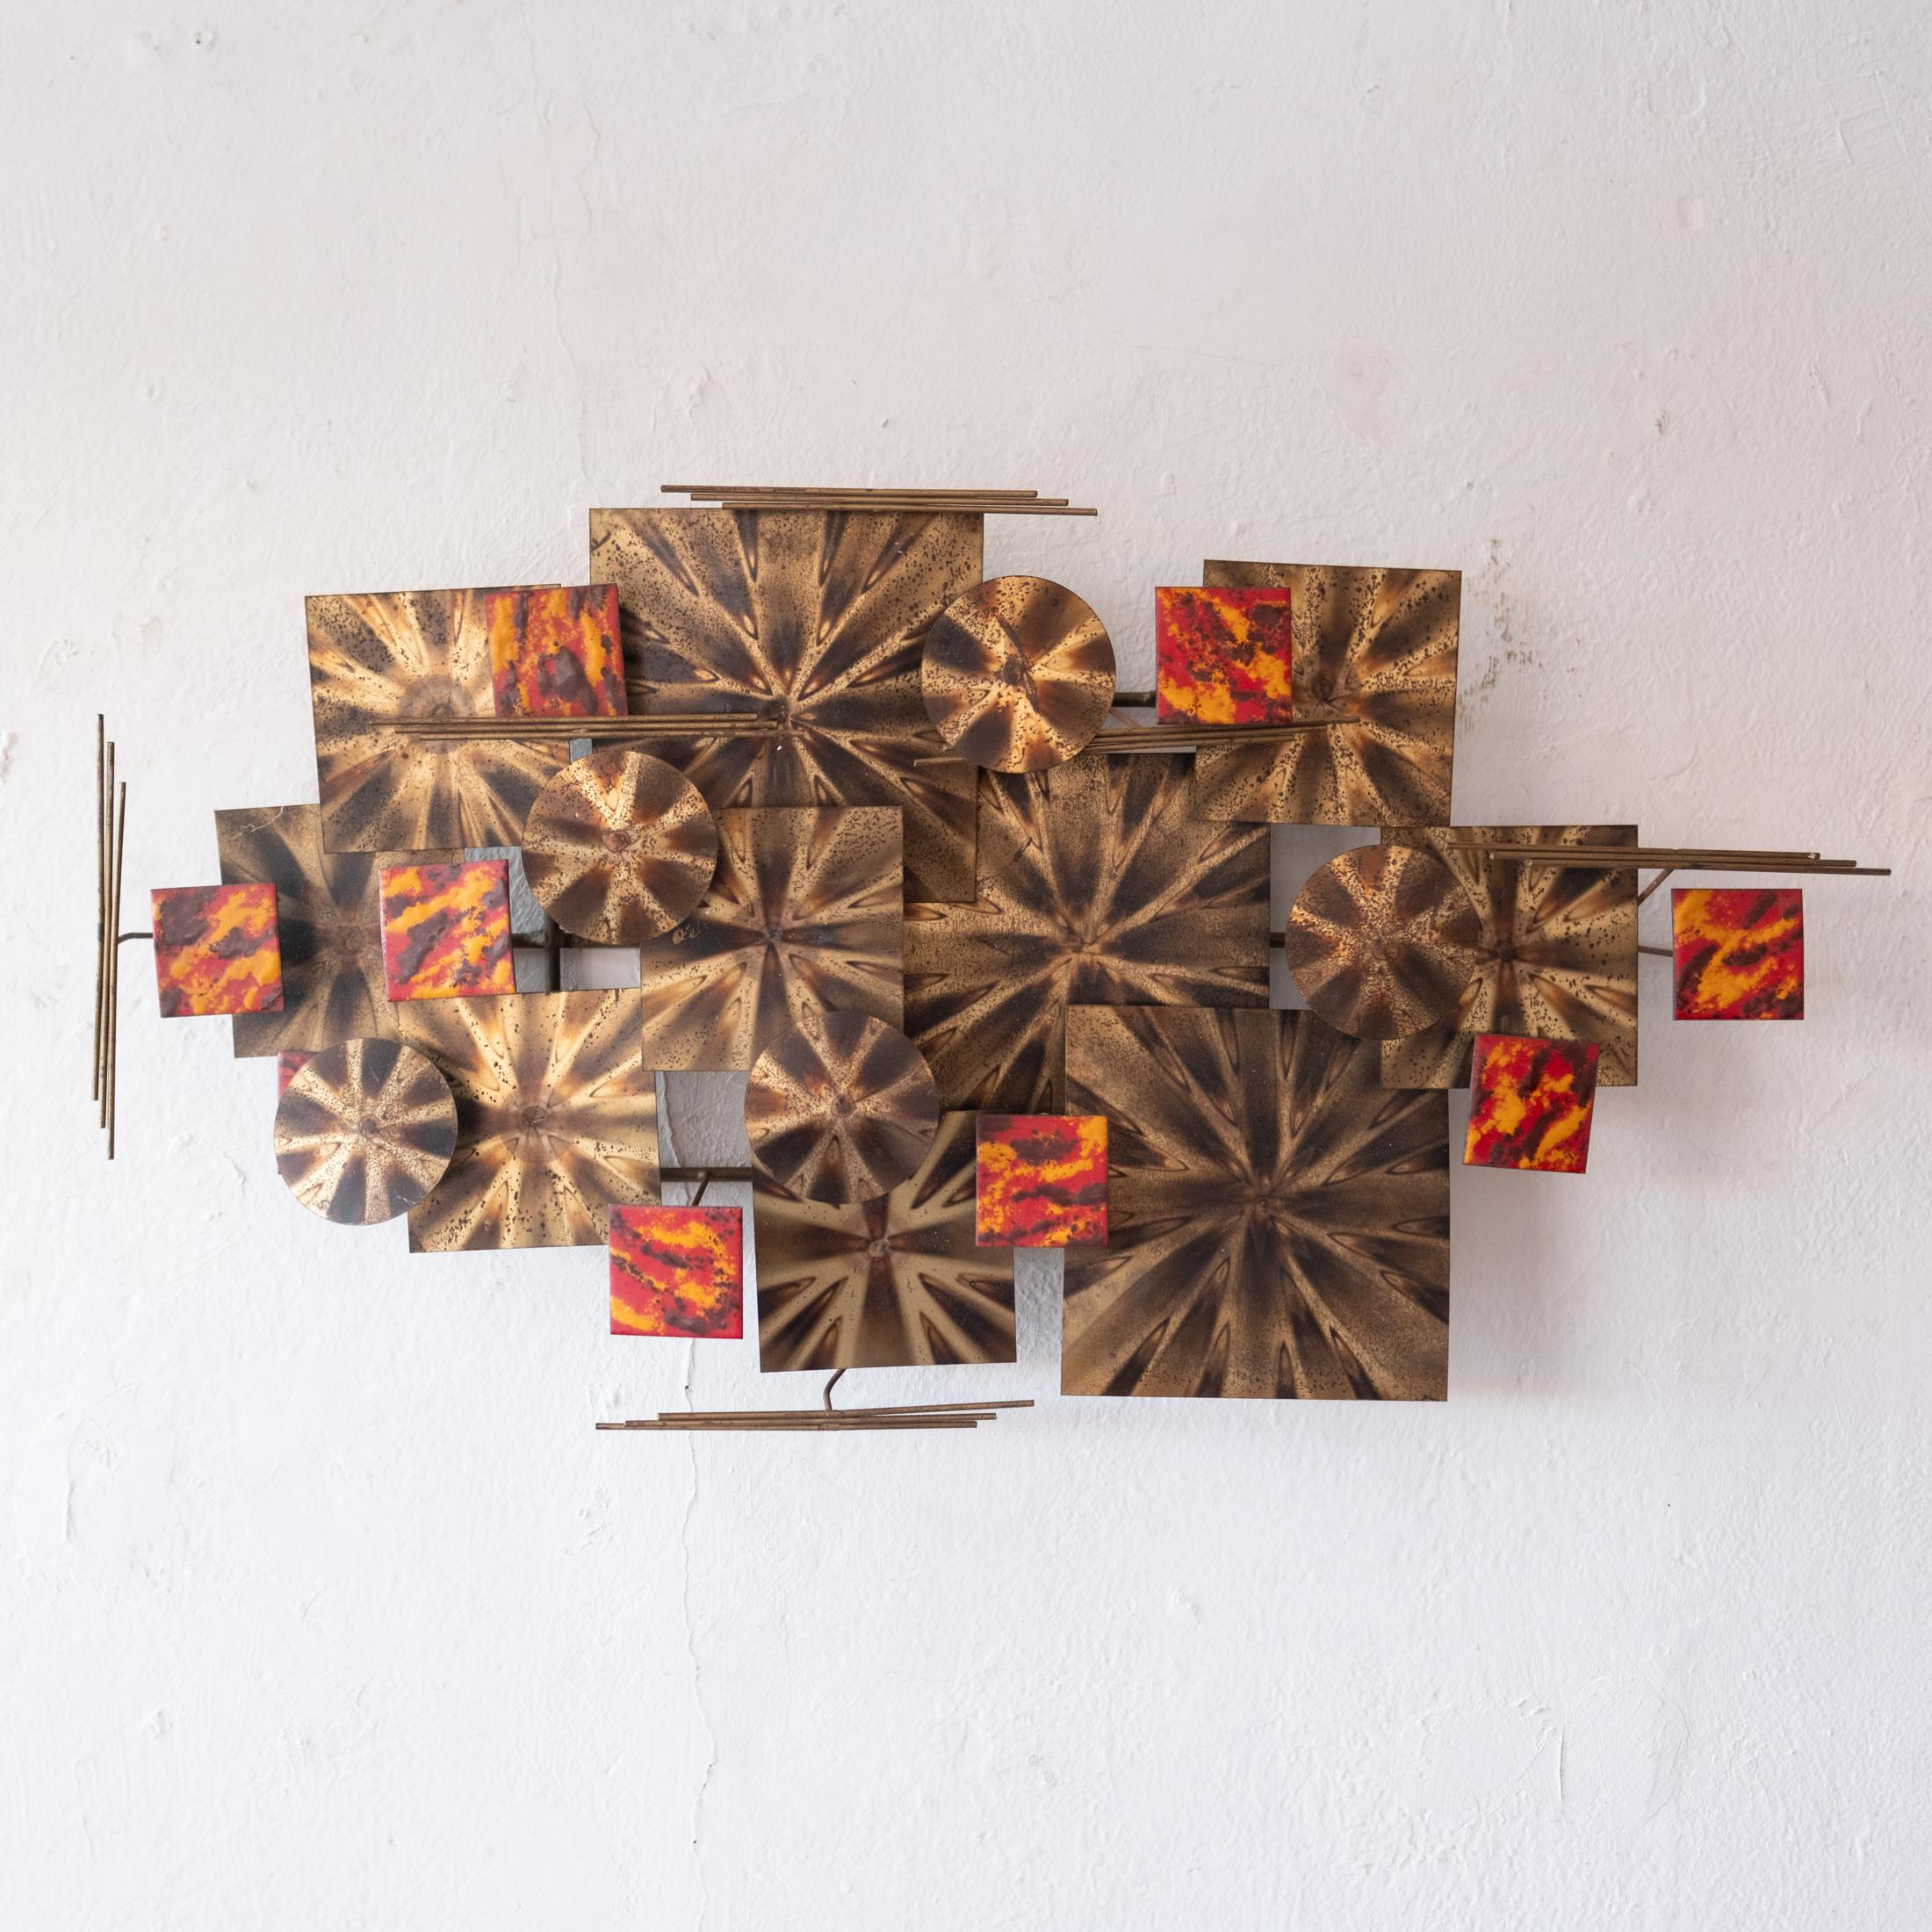 Incredible Mid-Century hand crafted wall-mounted sculpture with enamel on metal elements. Would look great over a fireplace. Can be mounted horizontal or vertically.   